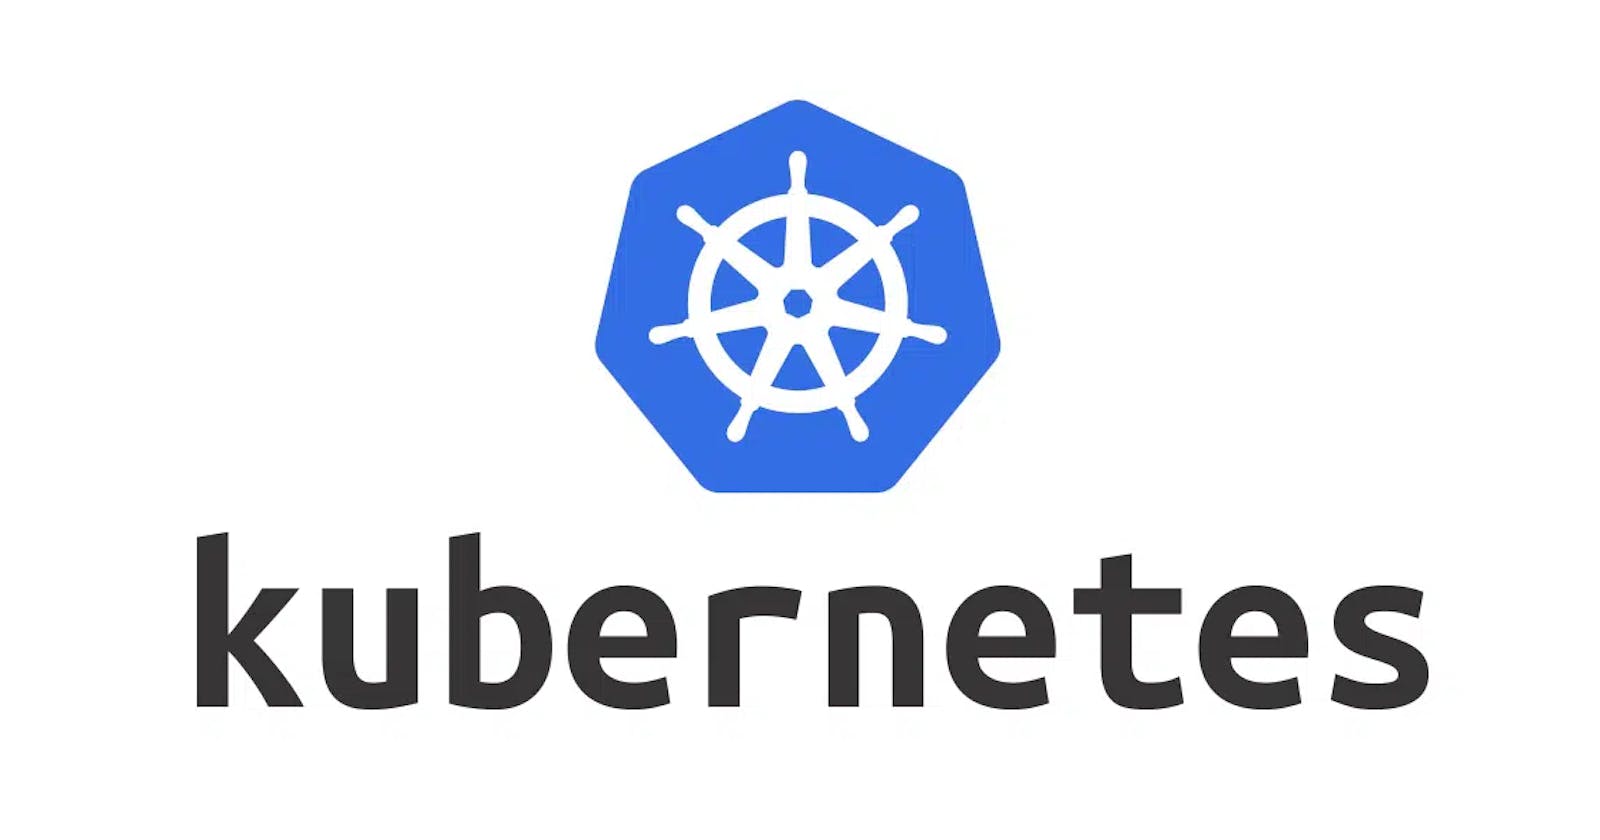 Guide to Kubeconfig Management and How It Keeps Kubernetes Clusters in Sync